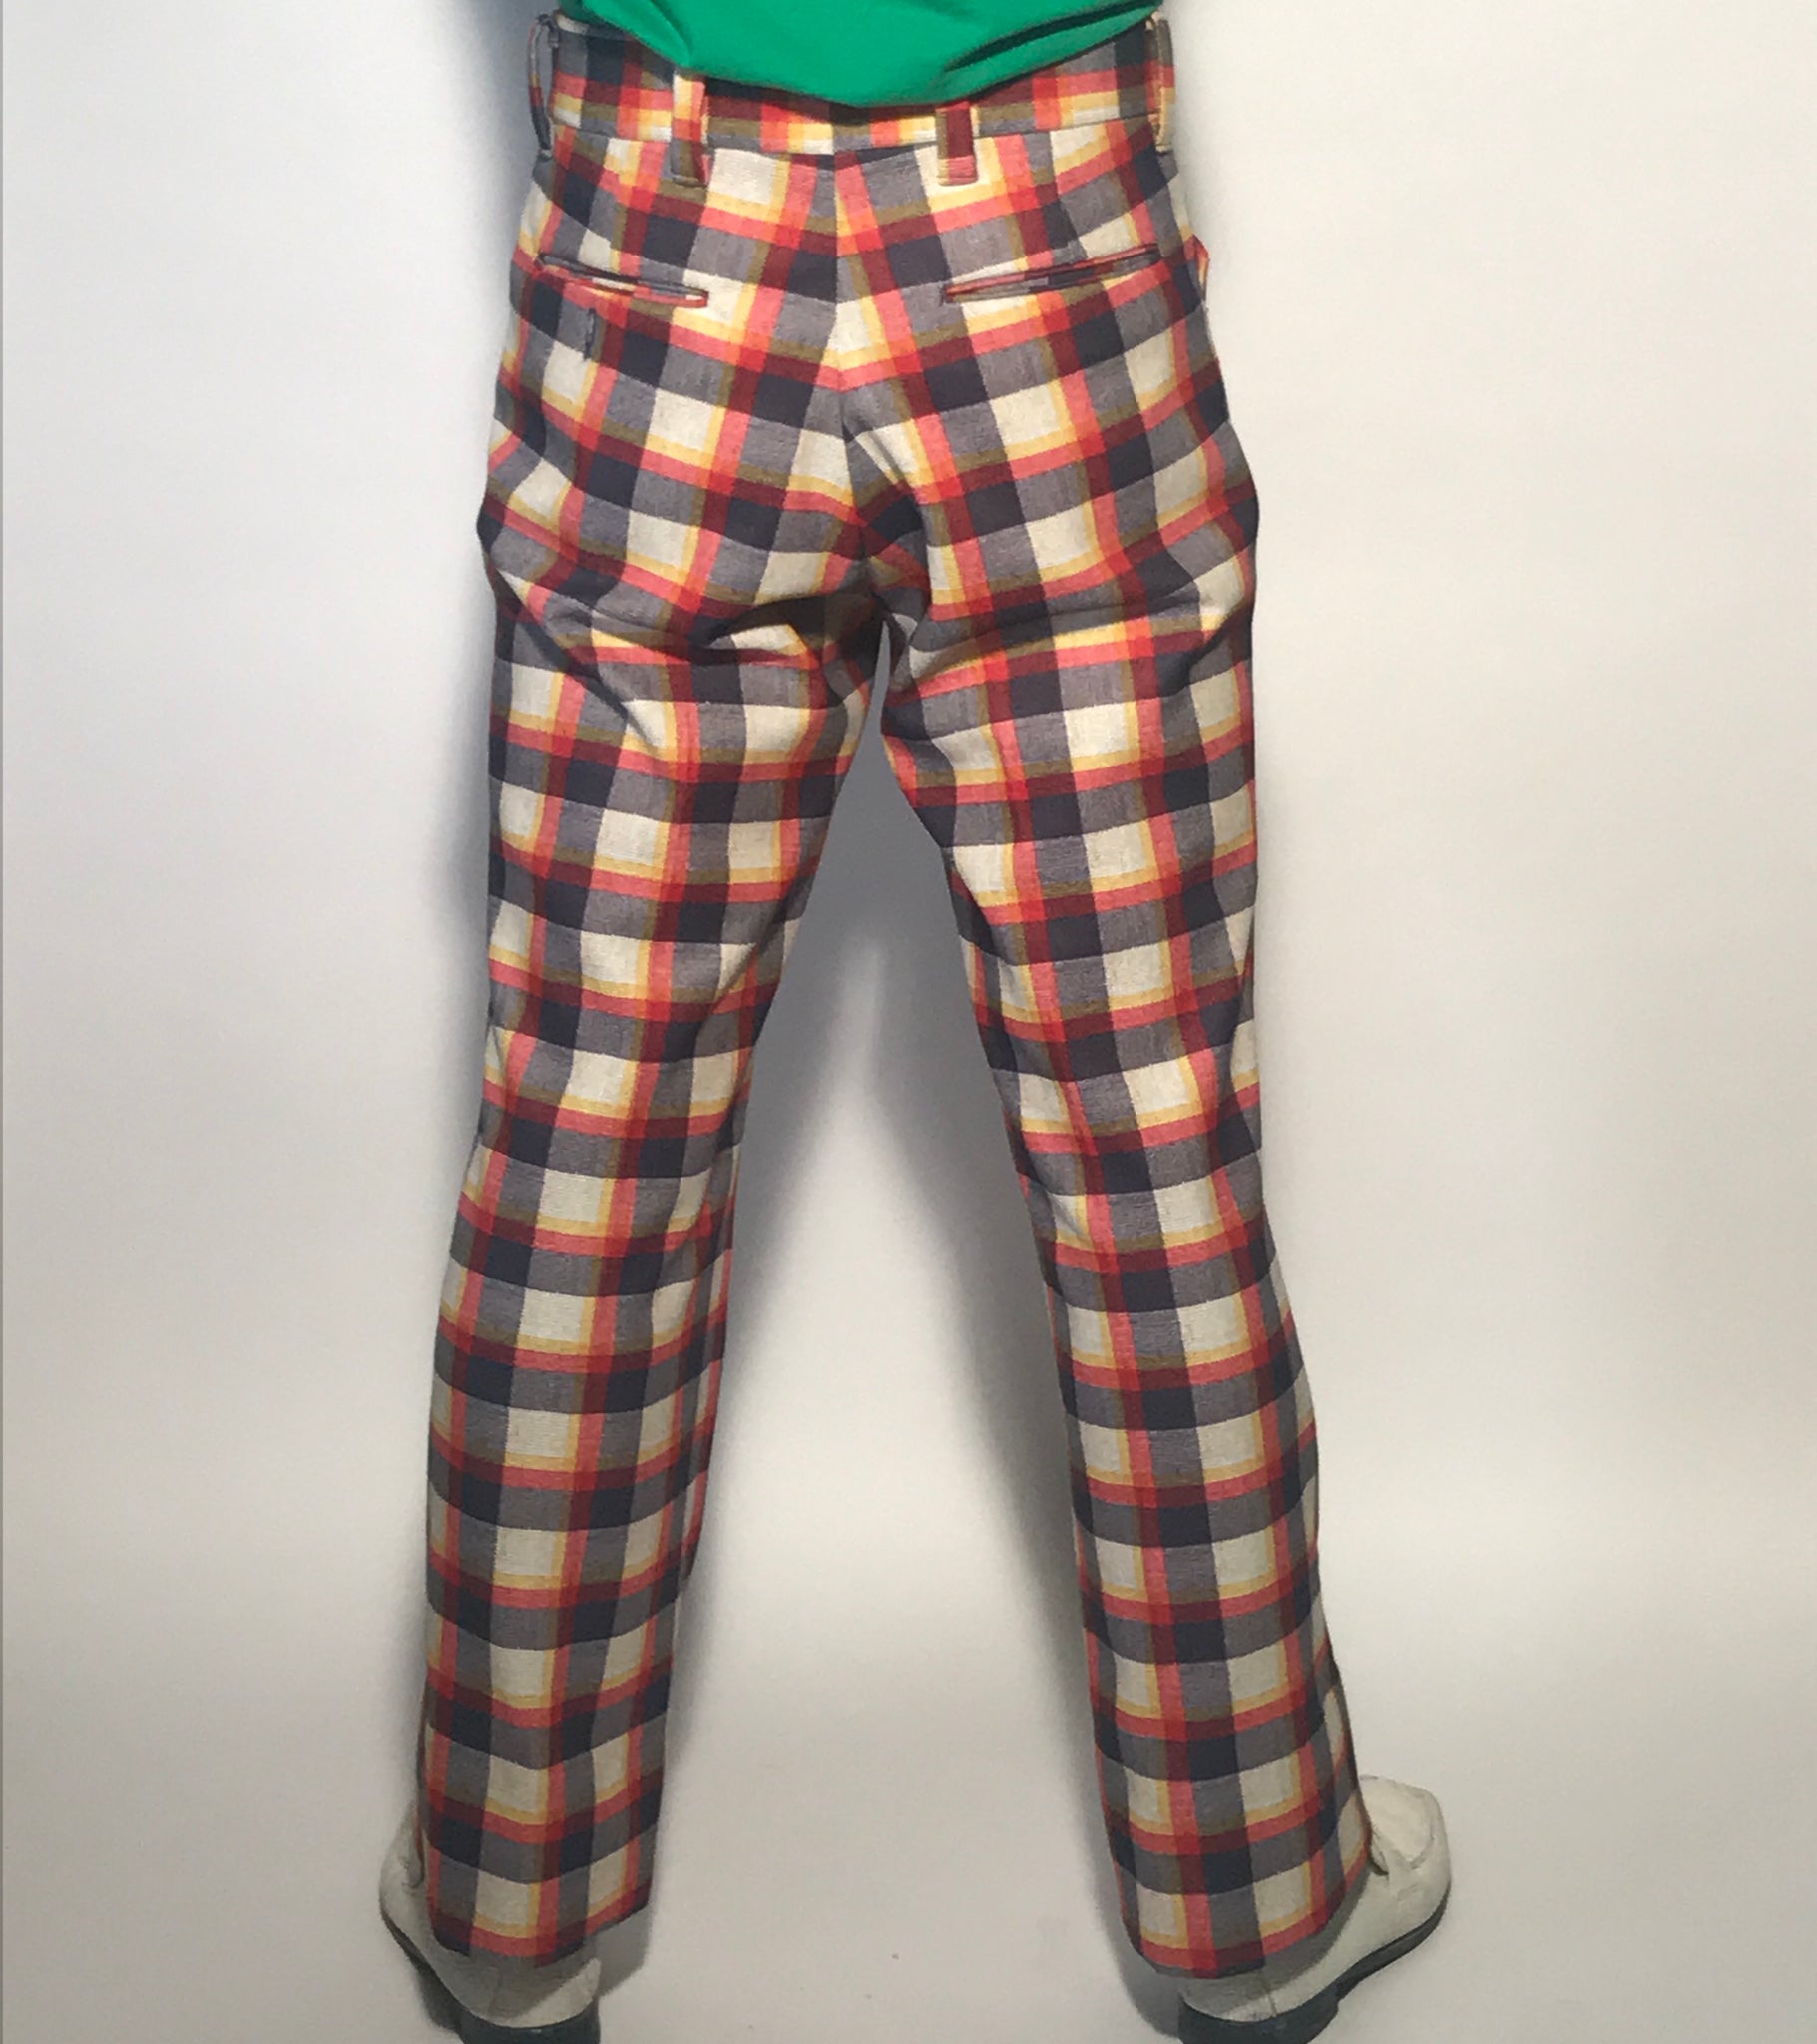 Sazz Vintage Clothing: (38x31) Mens Vintage Golf Pants. Black and Rainbow  Checkered. Loud Mouth!